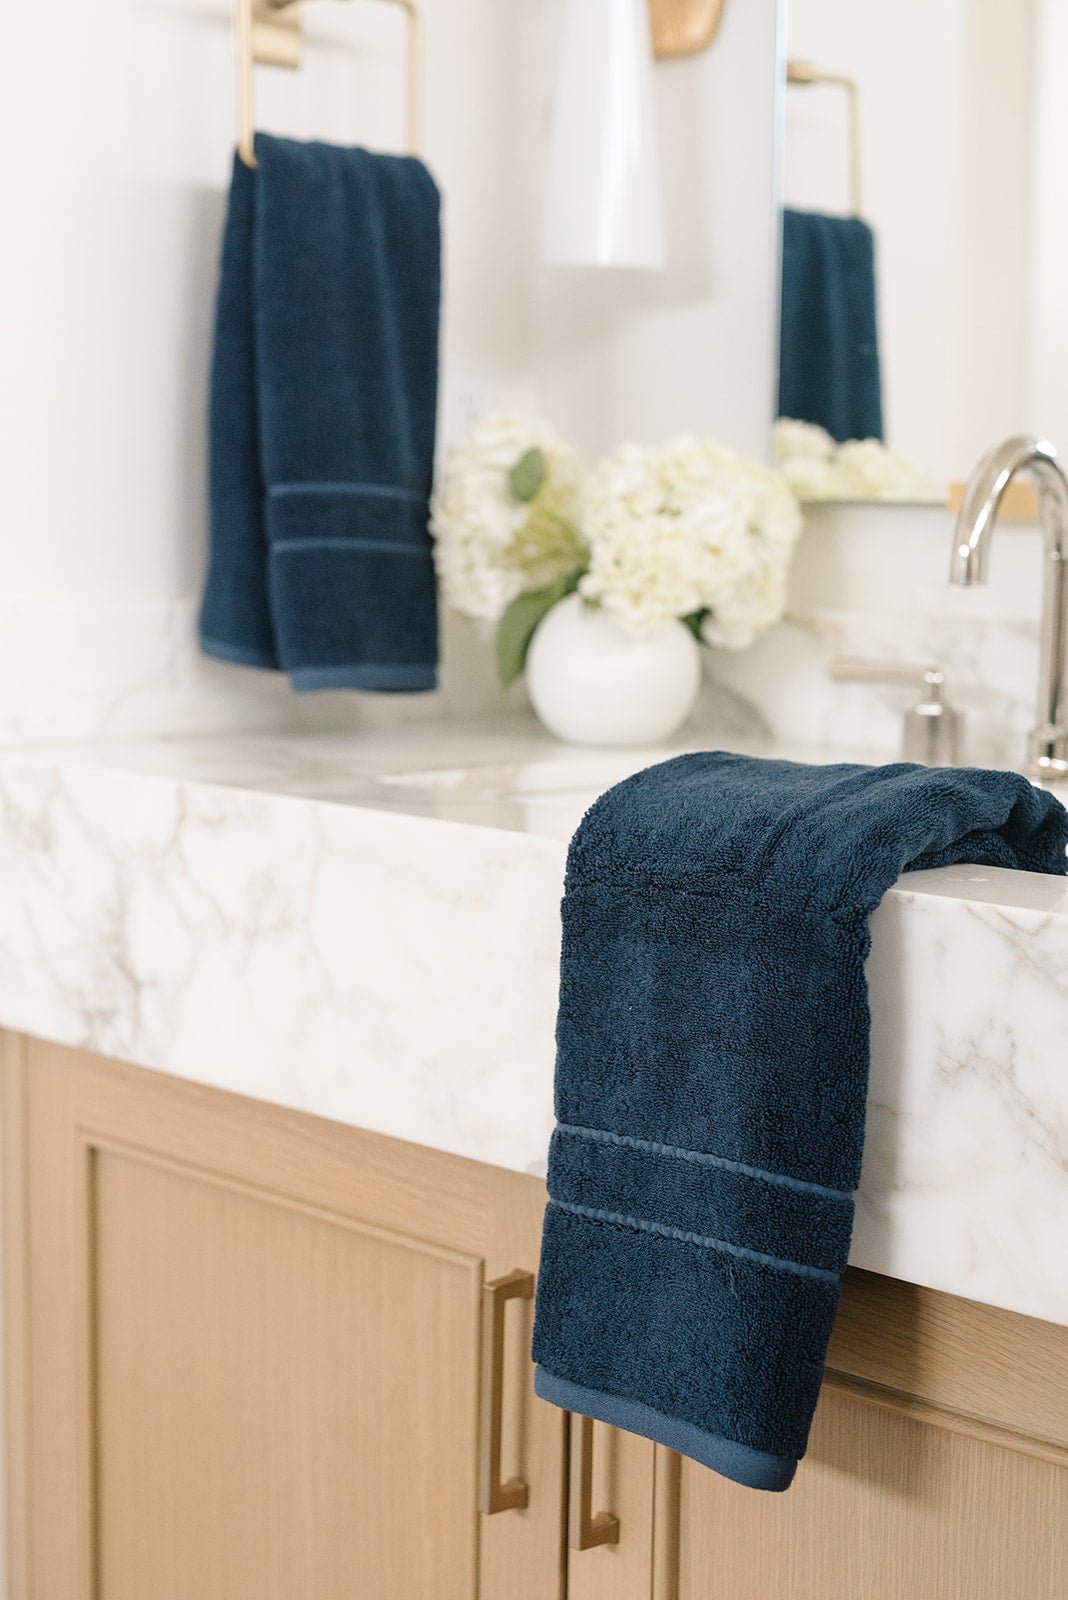 Premium Plush Hand Towel in the color Dusk. Photo of Dusk Premium Plush Hand Towel taken in a bathroom. one Premium Plush Hand Towel is hanging from a towel ring while the other is resting on the sink in the bathroom. 